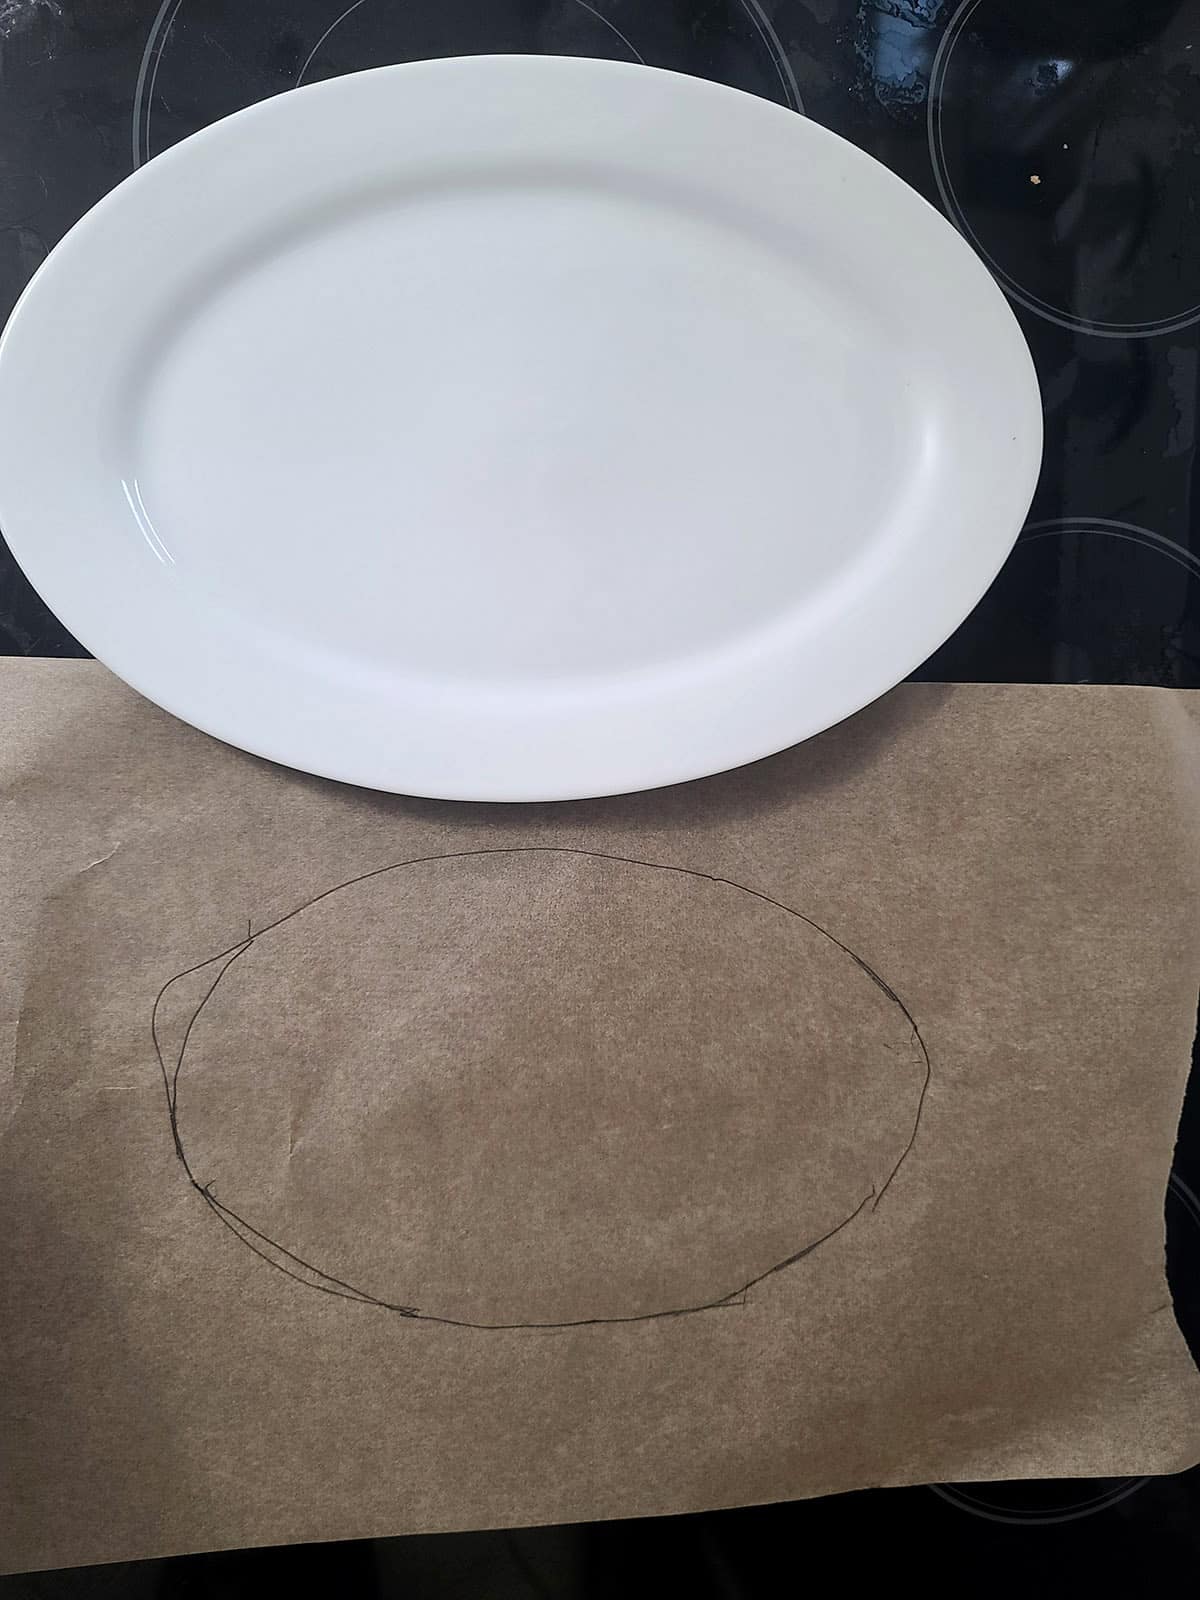 A 2 part image showing an oval platter and a parchment paper with an oval drawn on it.